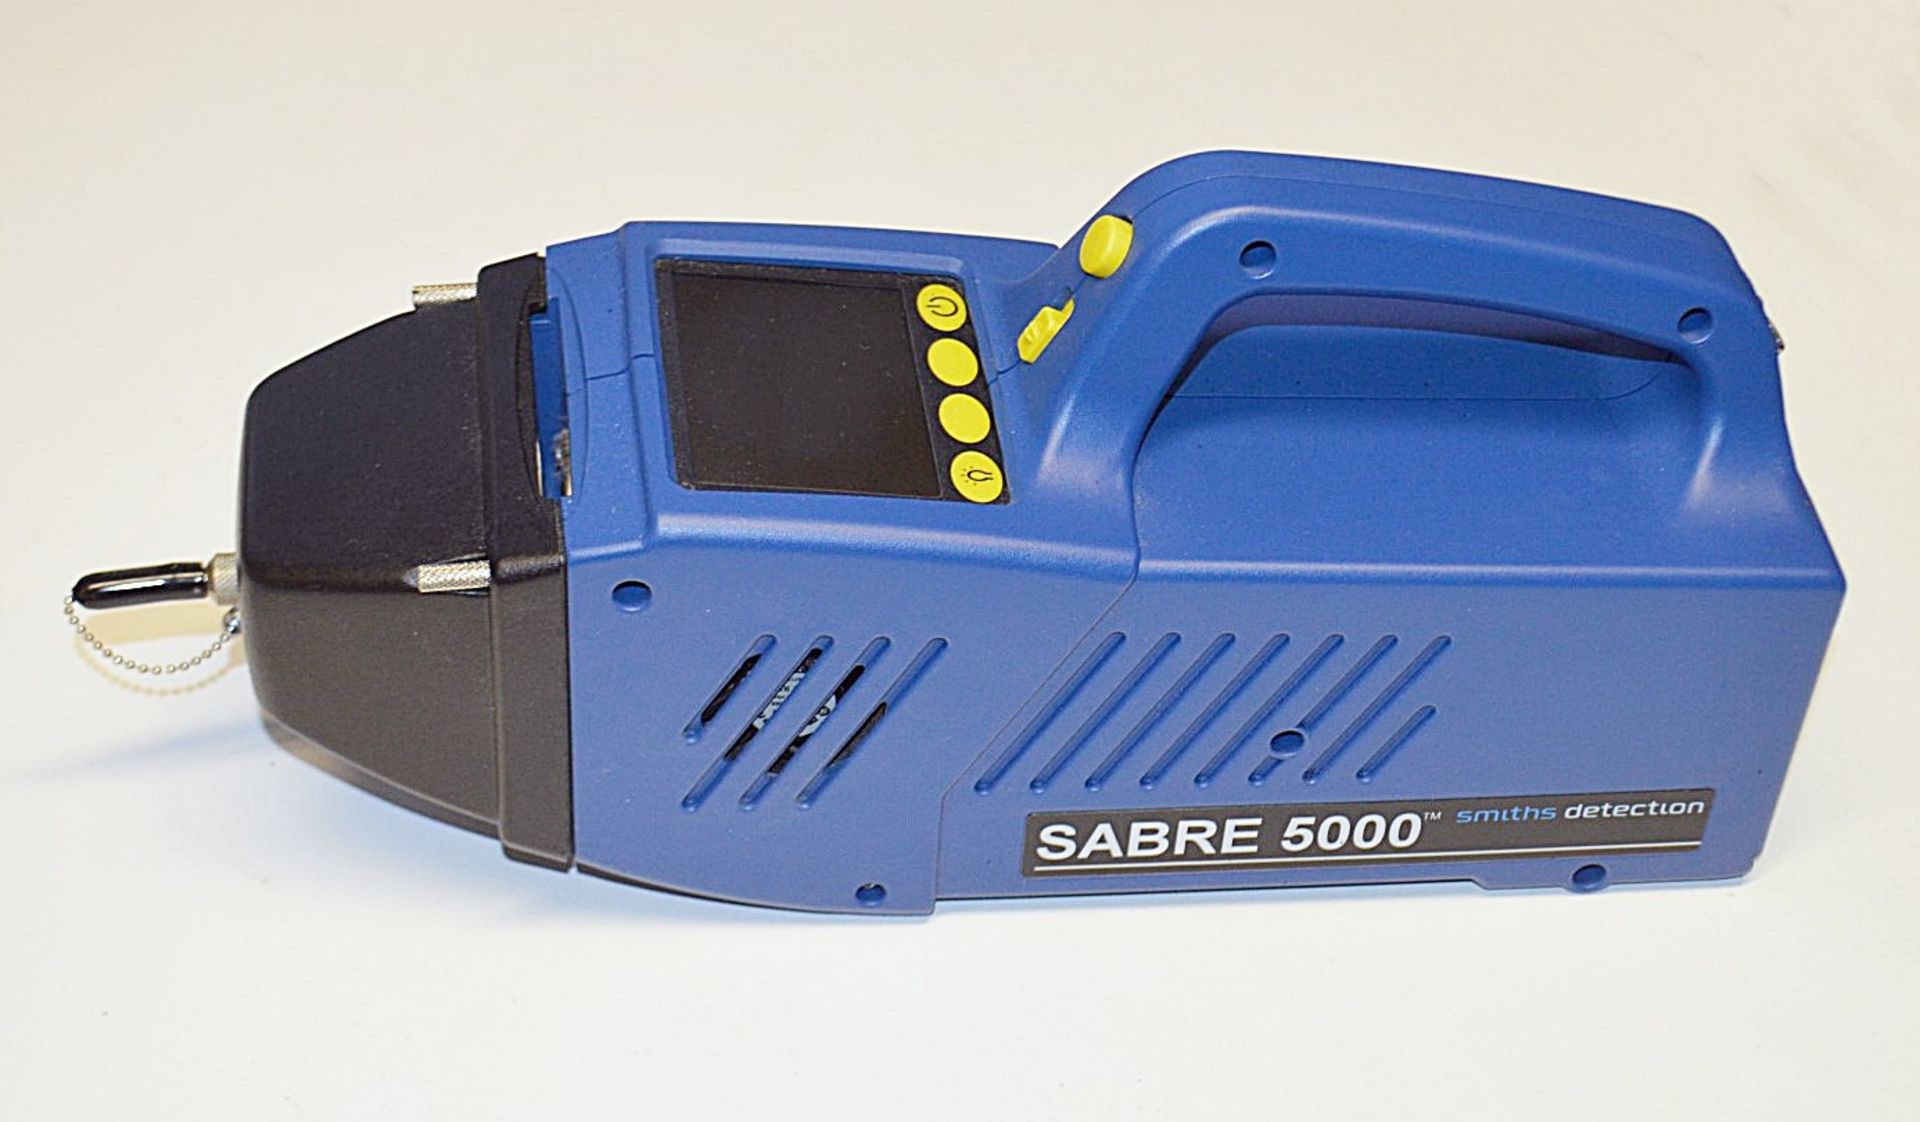 1 x SABRE™ 5000 Handheld Trace Detector - For Explosives, Chemical Agents - Original Price £24,500 - Image 2 of 31